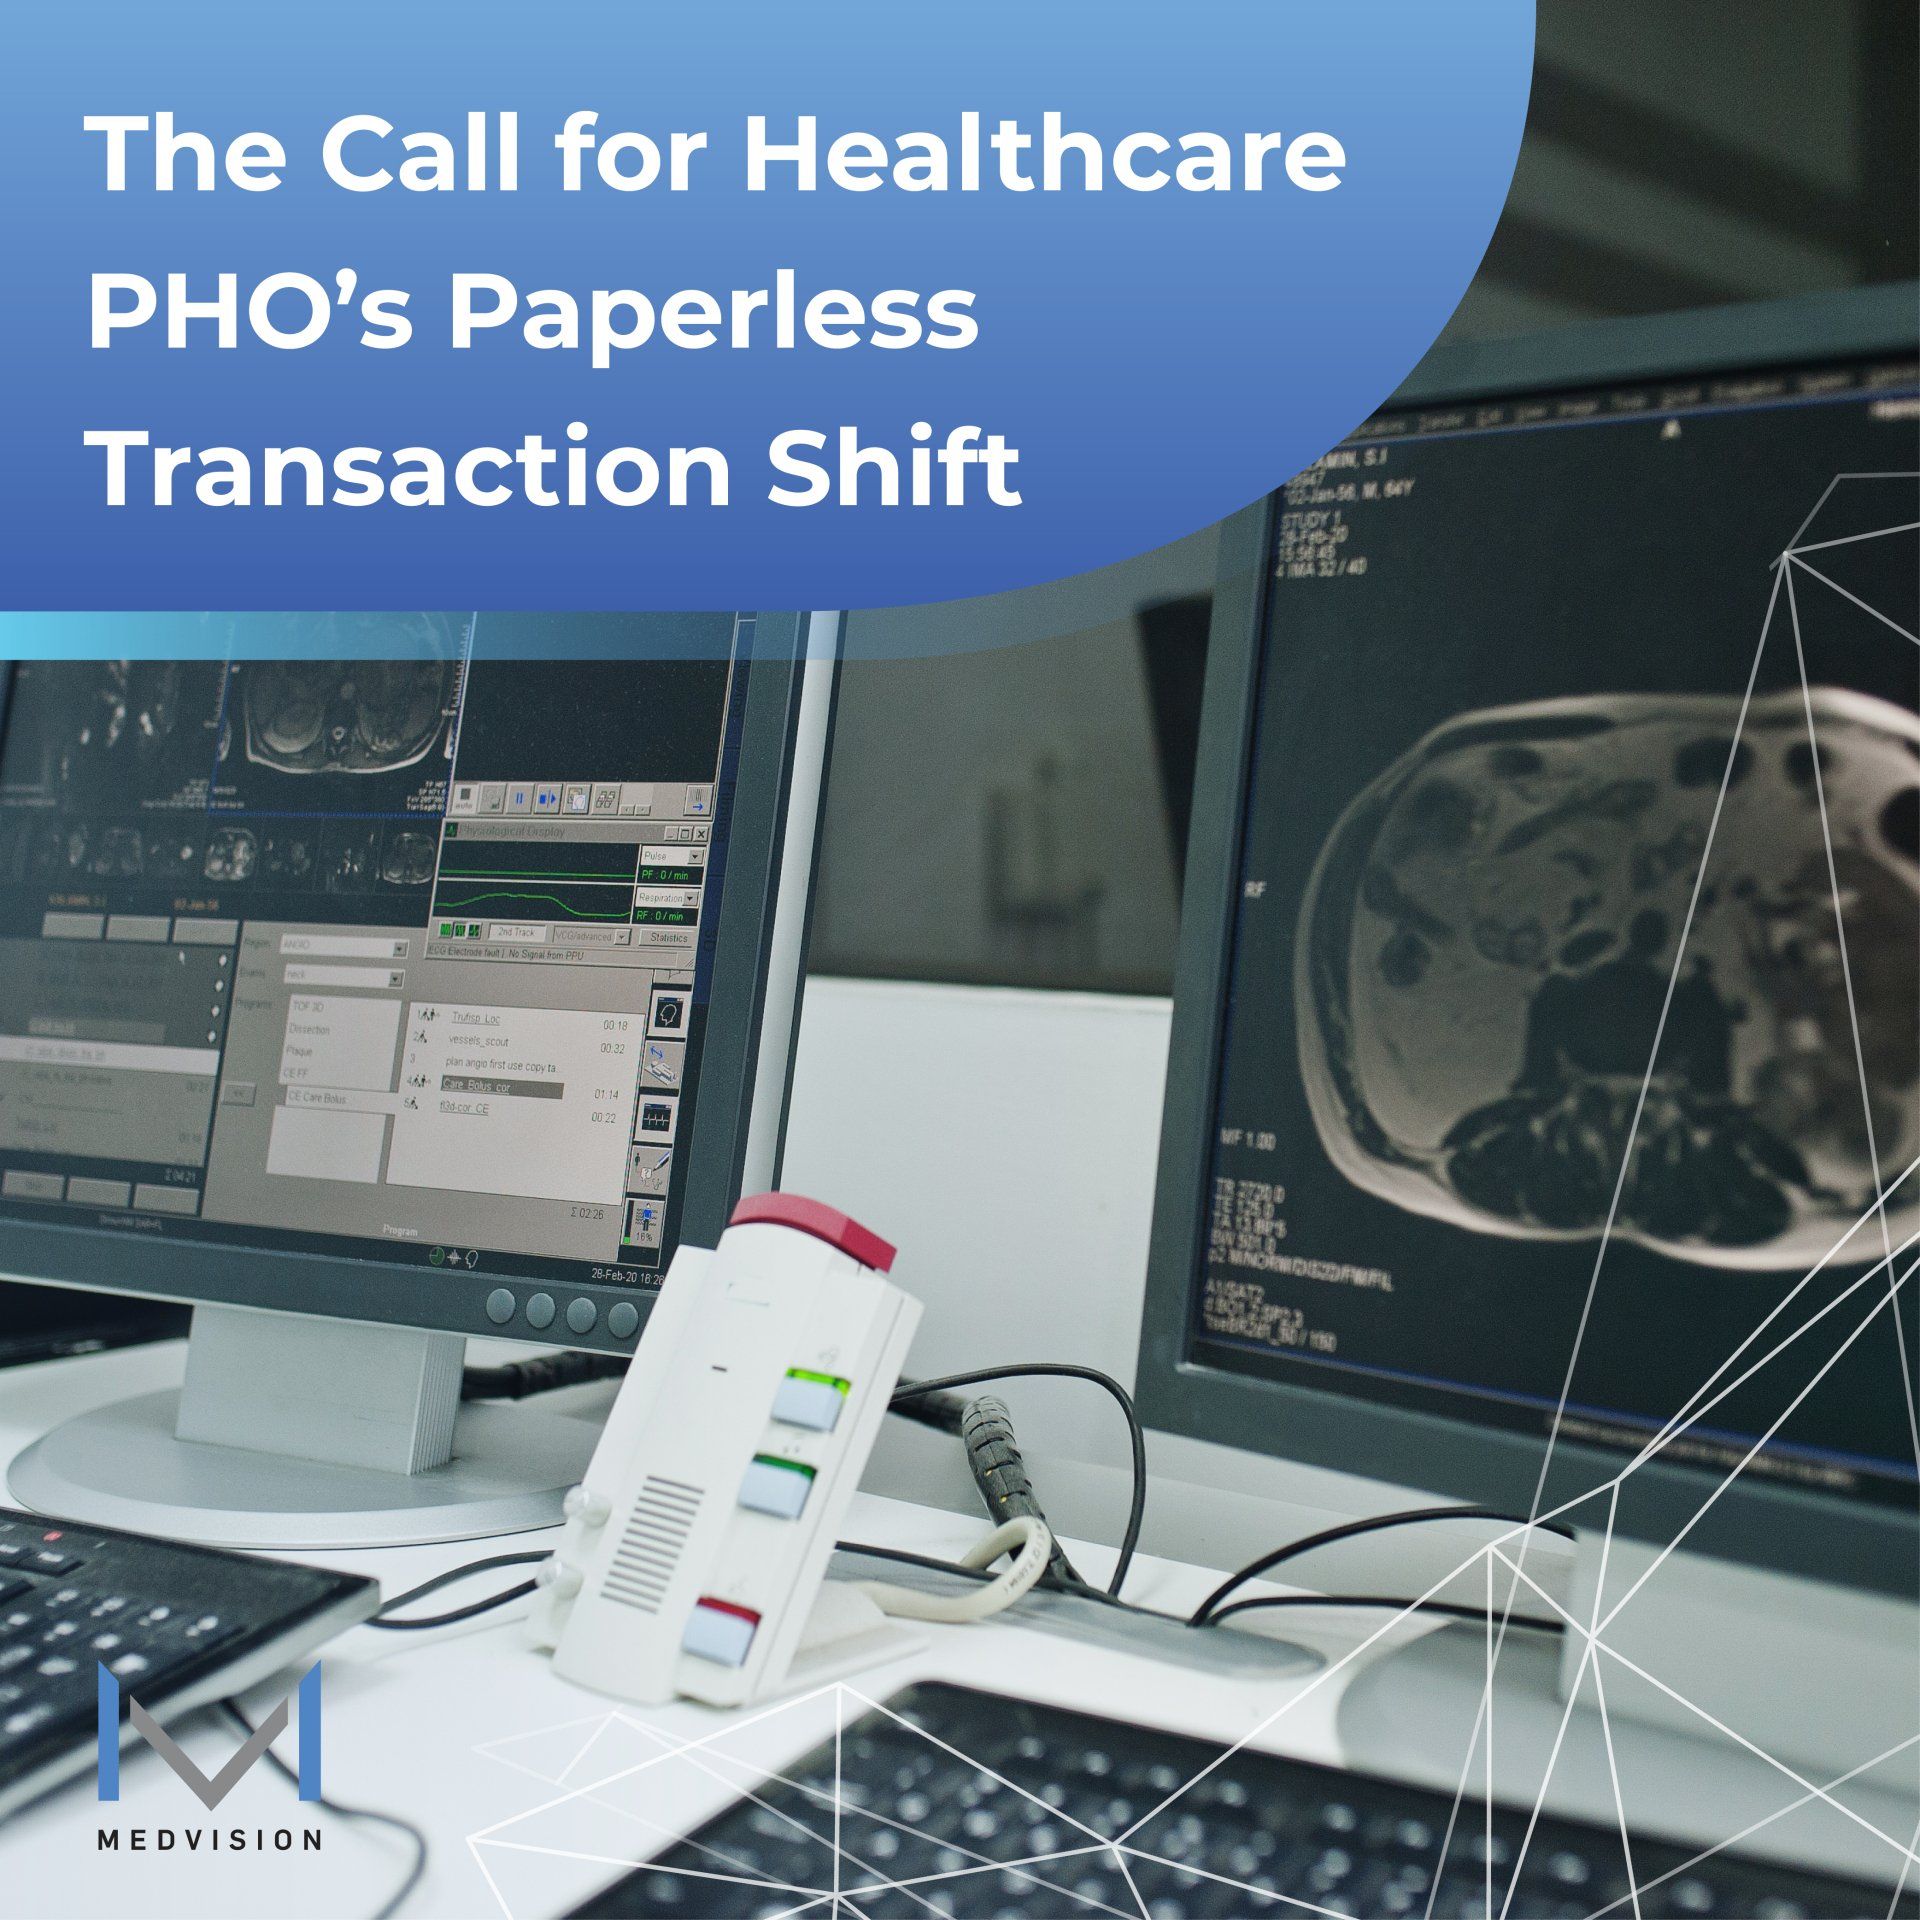 The Call for Healthcare PHO’s Paperless Transaction Shift